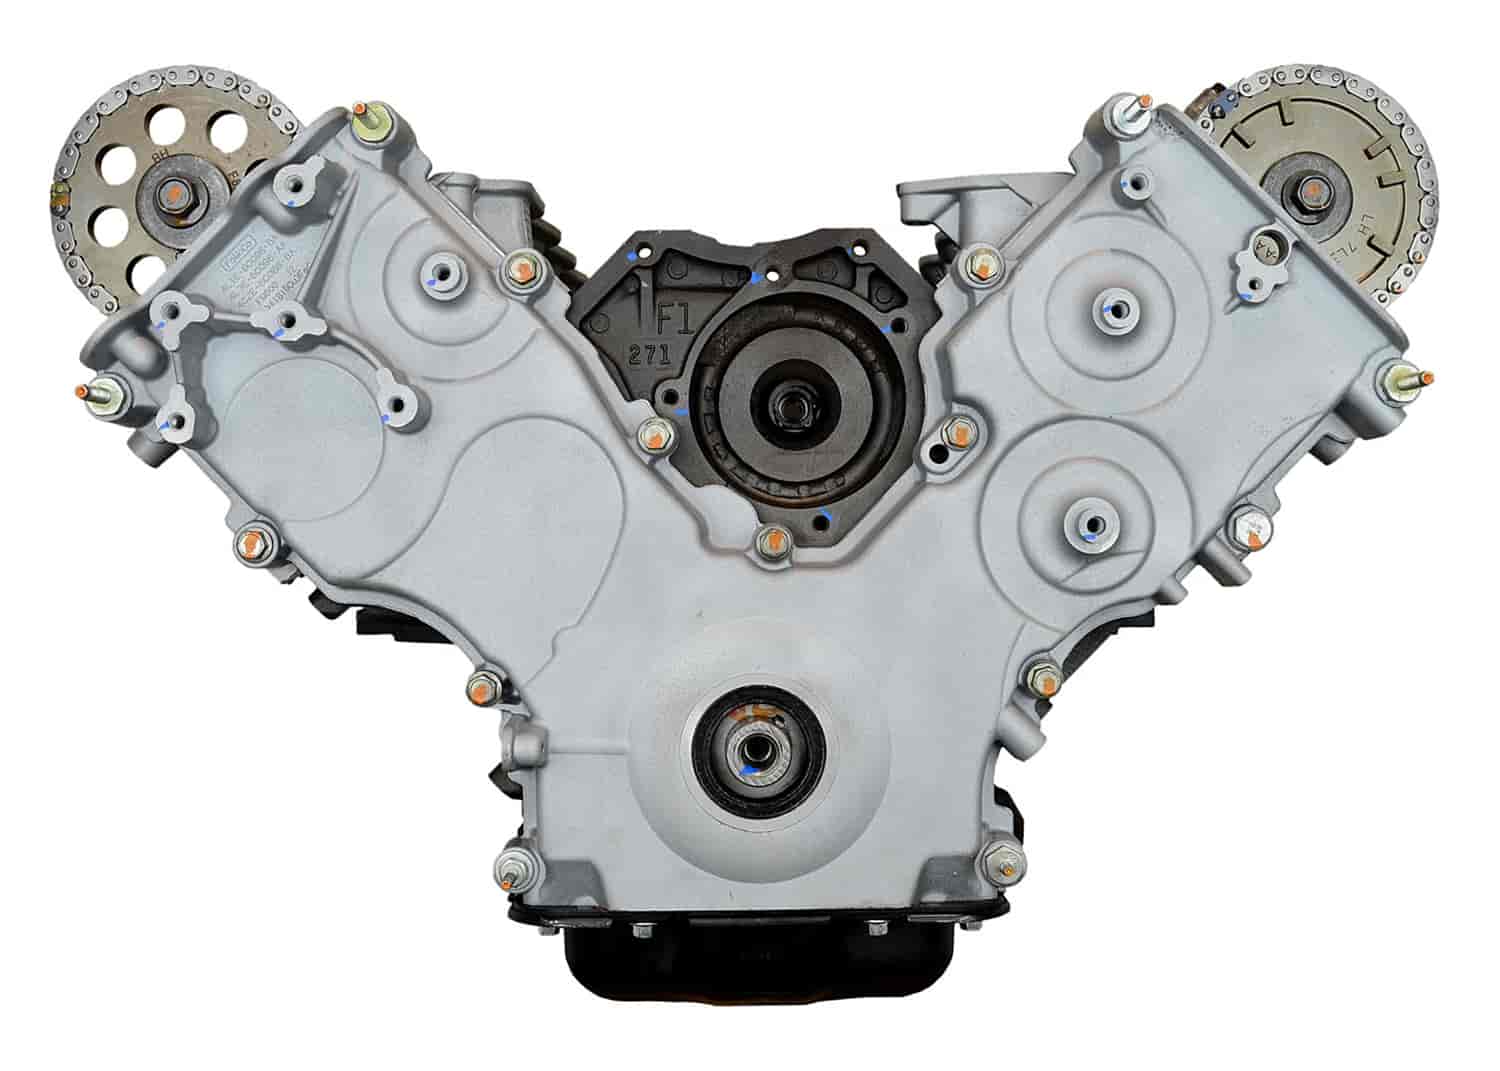 Remanufactured Crate Engine for 2007-2010 Ford F-Series Truck